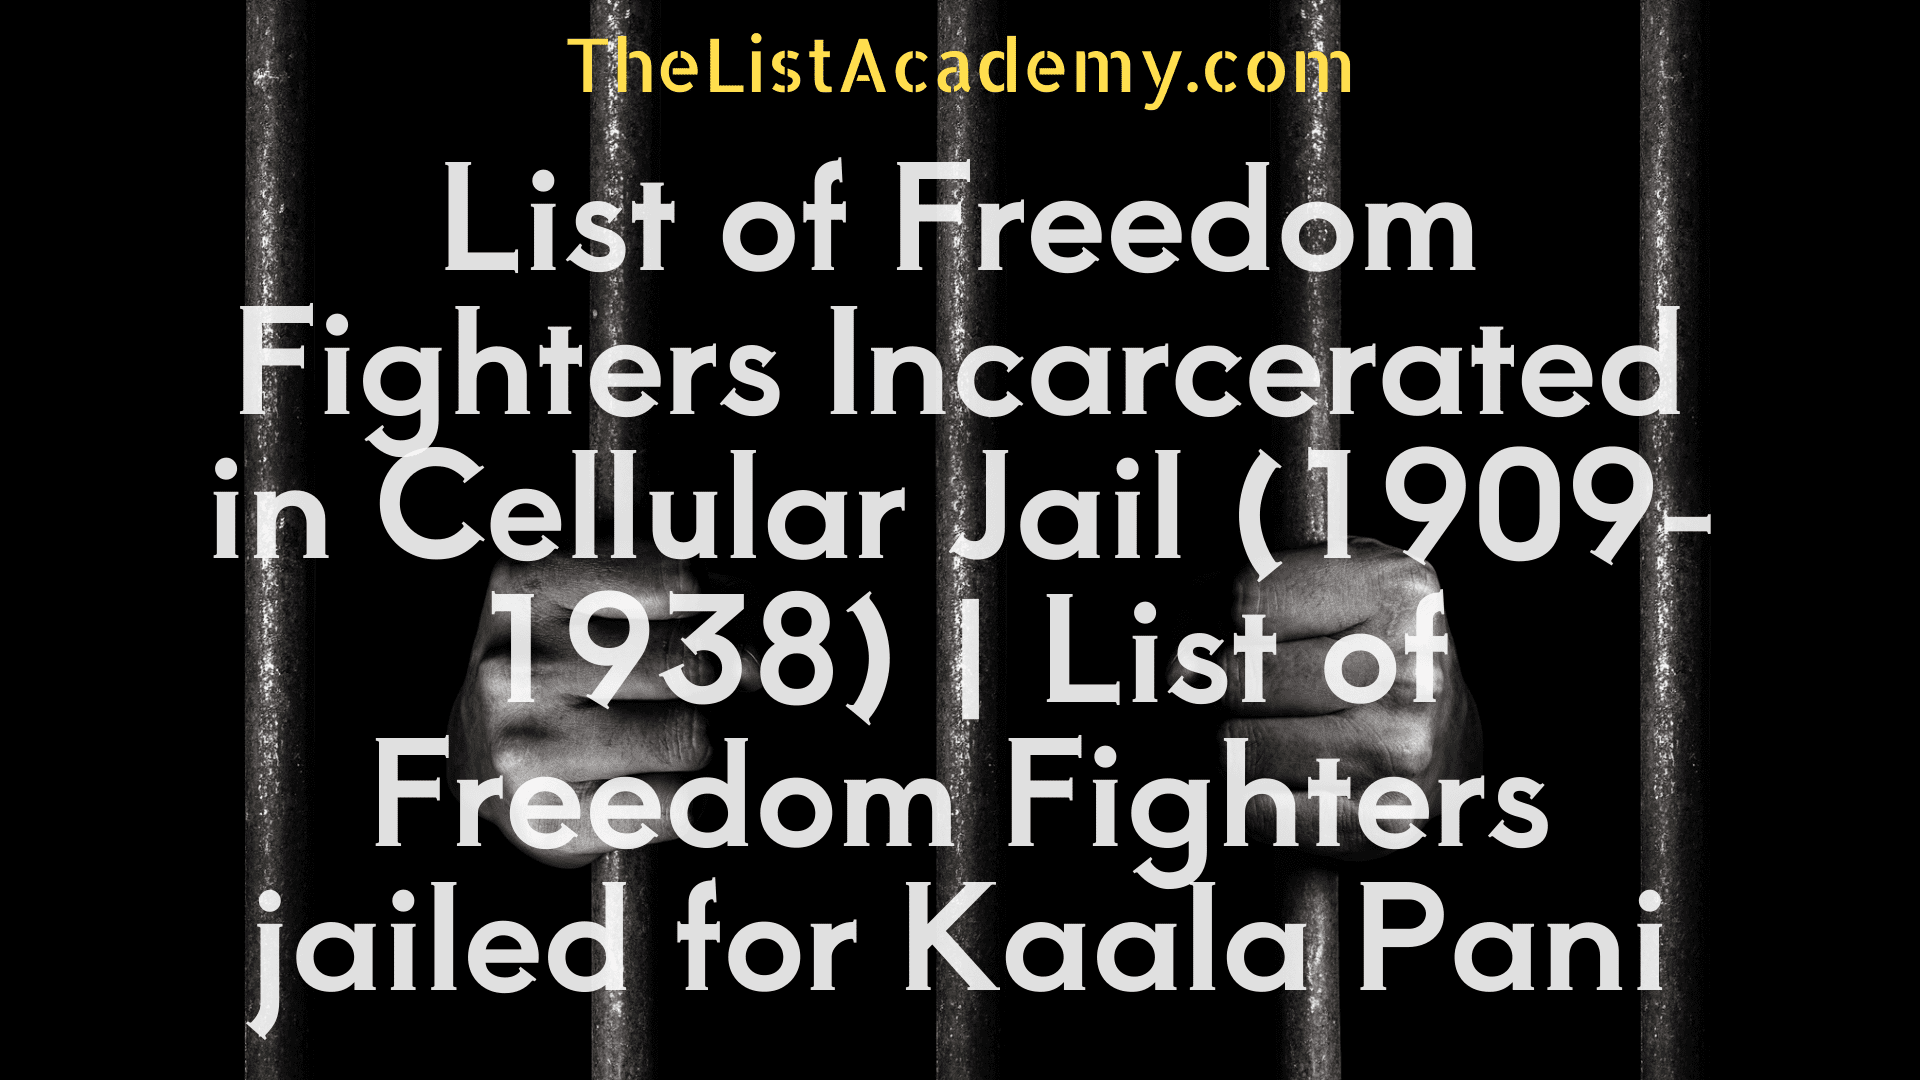 Cover Image For List : List Of Freedom Fighters Incarcerated In Cellular Jail | List Of Freedom Fighters Jailed For Kaala Pani